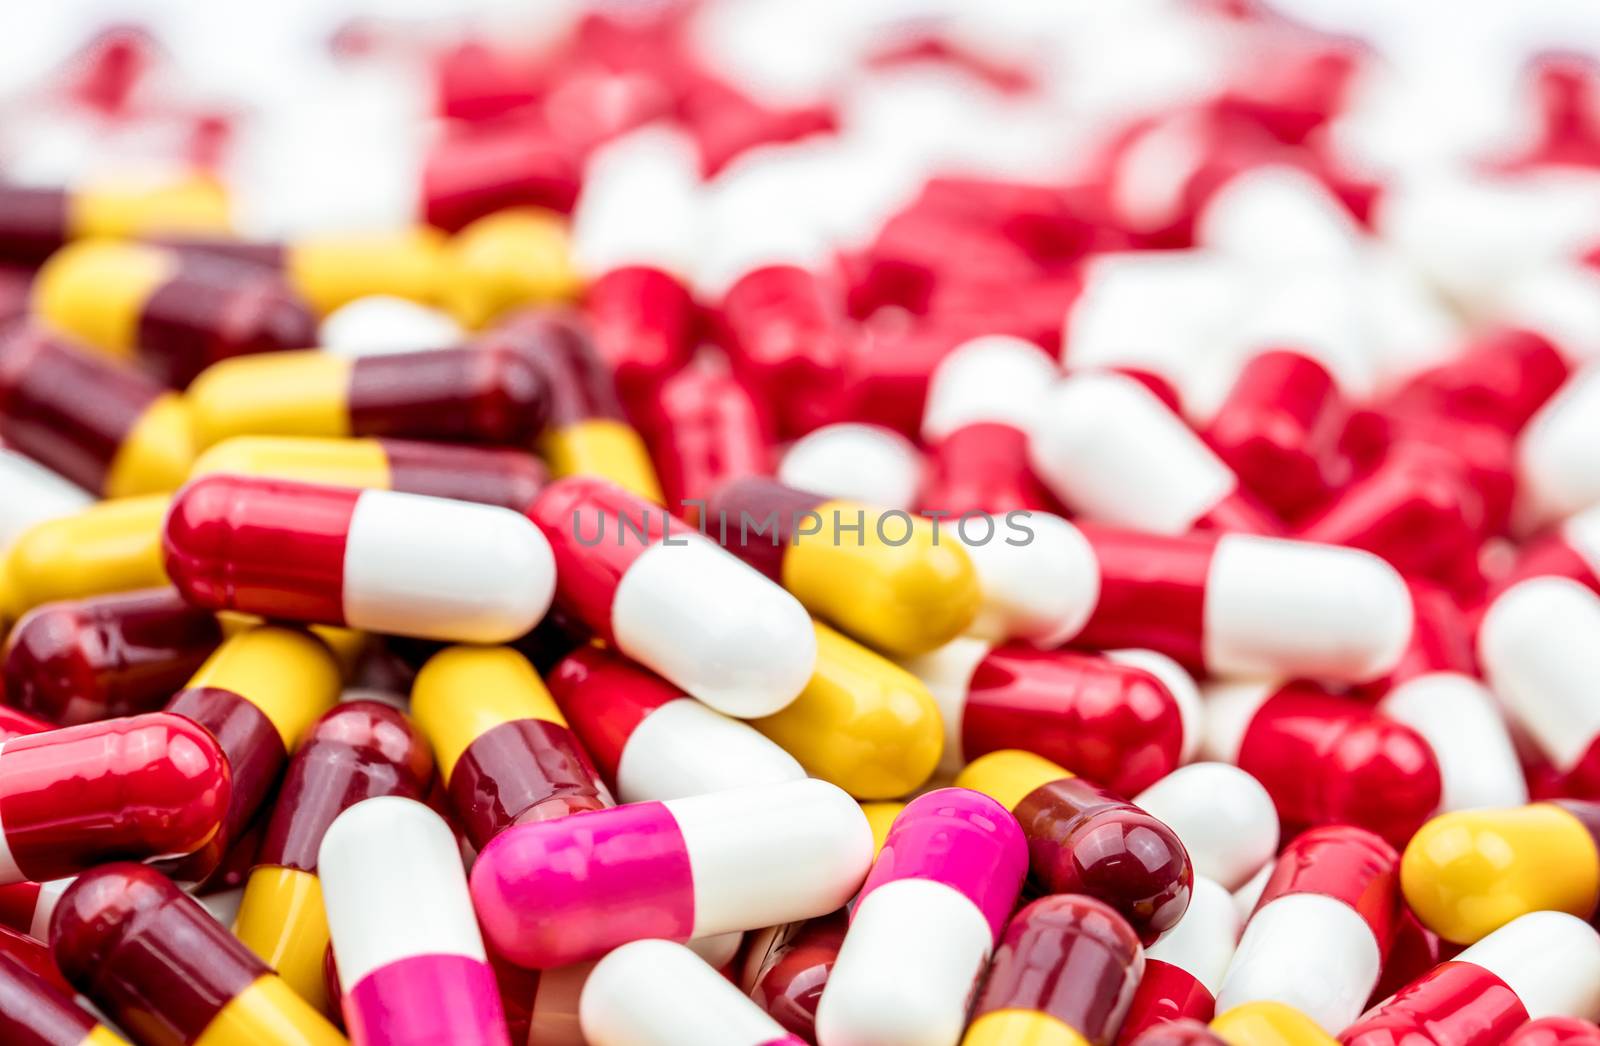 Selective focus on colorful of antibiotic capsules pills on blur background with copy space. Drug resistance concept. Antibiotics drug use with reasonable and global healthcare concept. Pharmaceutical industry. Pharmacy background.